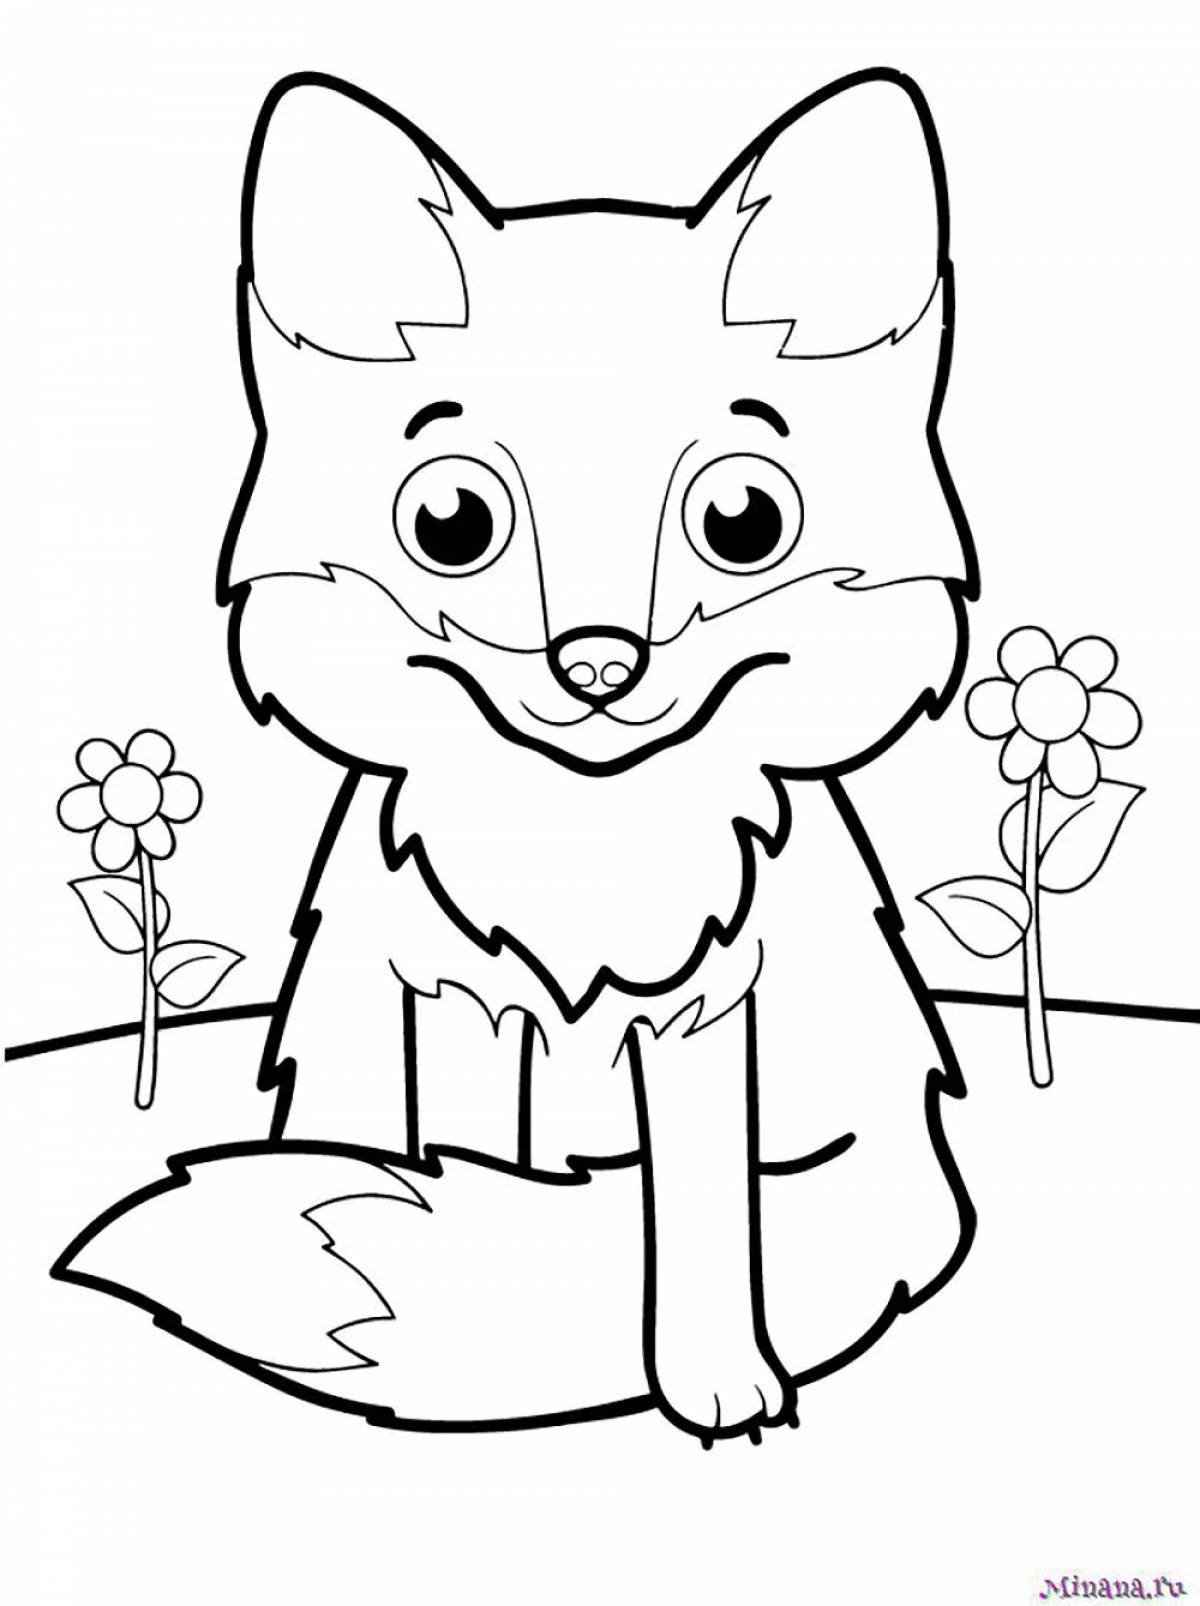 Creative fox coloring for kids